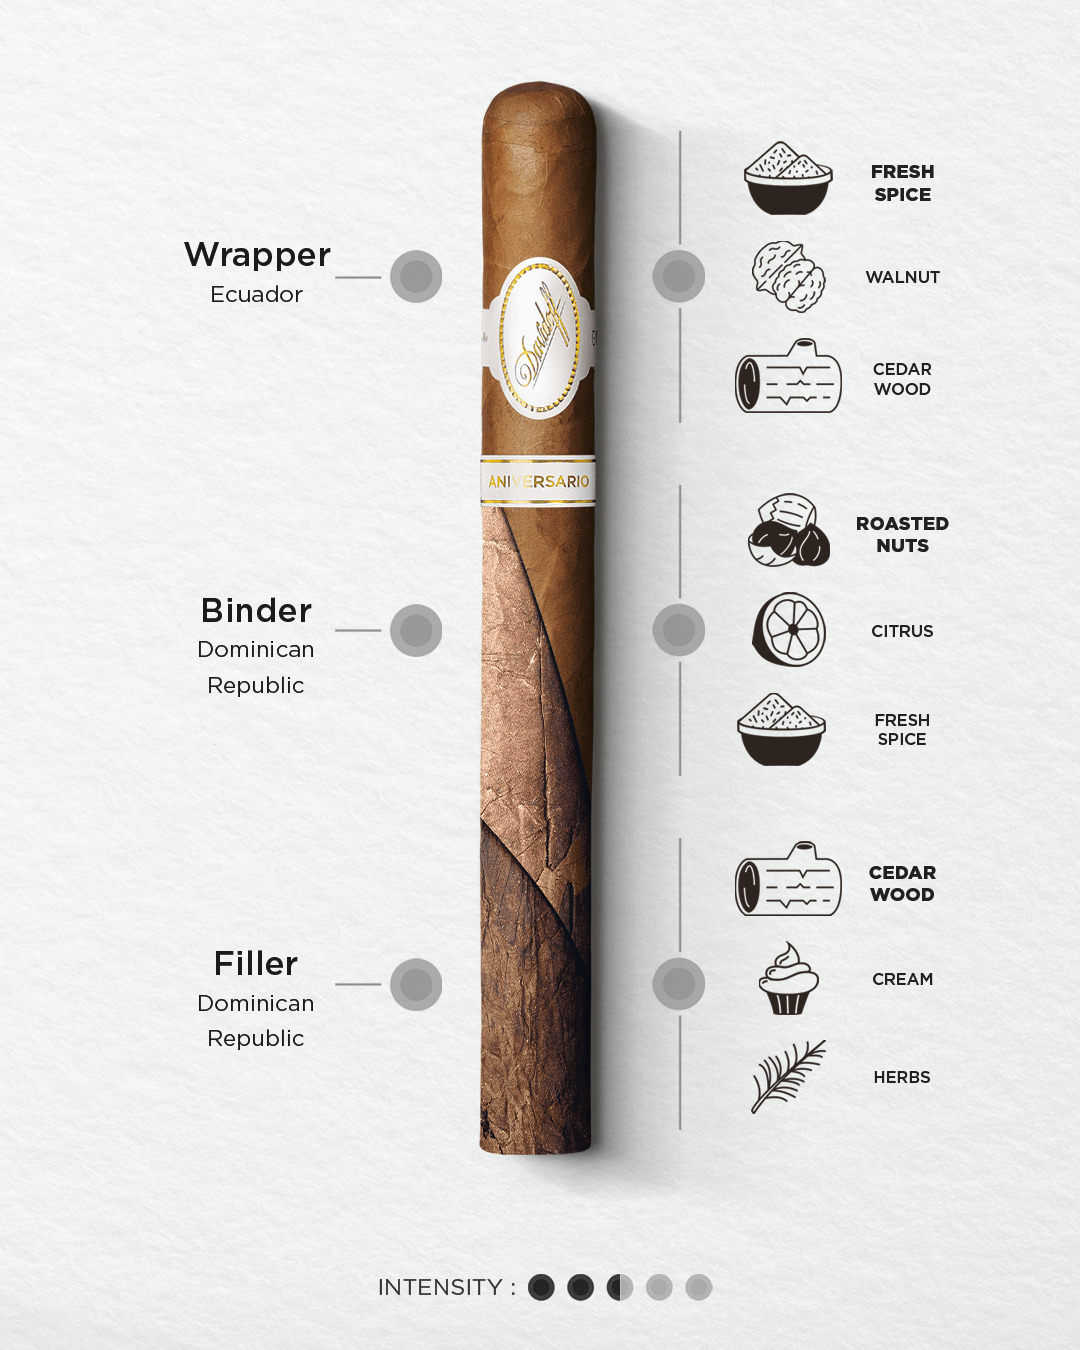 Detailed description of the Davidoff Aniversario blend in terms of intensity, tasting notes, main aromas and tobacco origins.